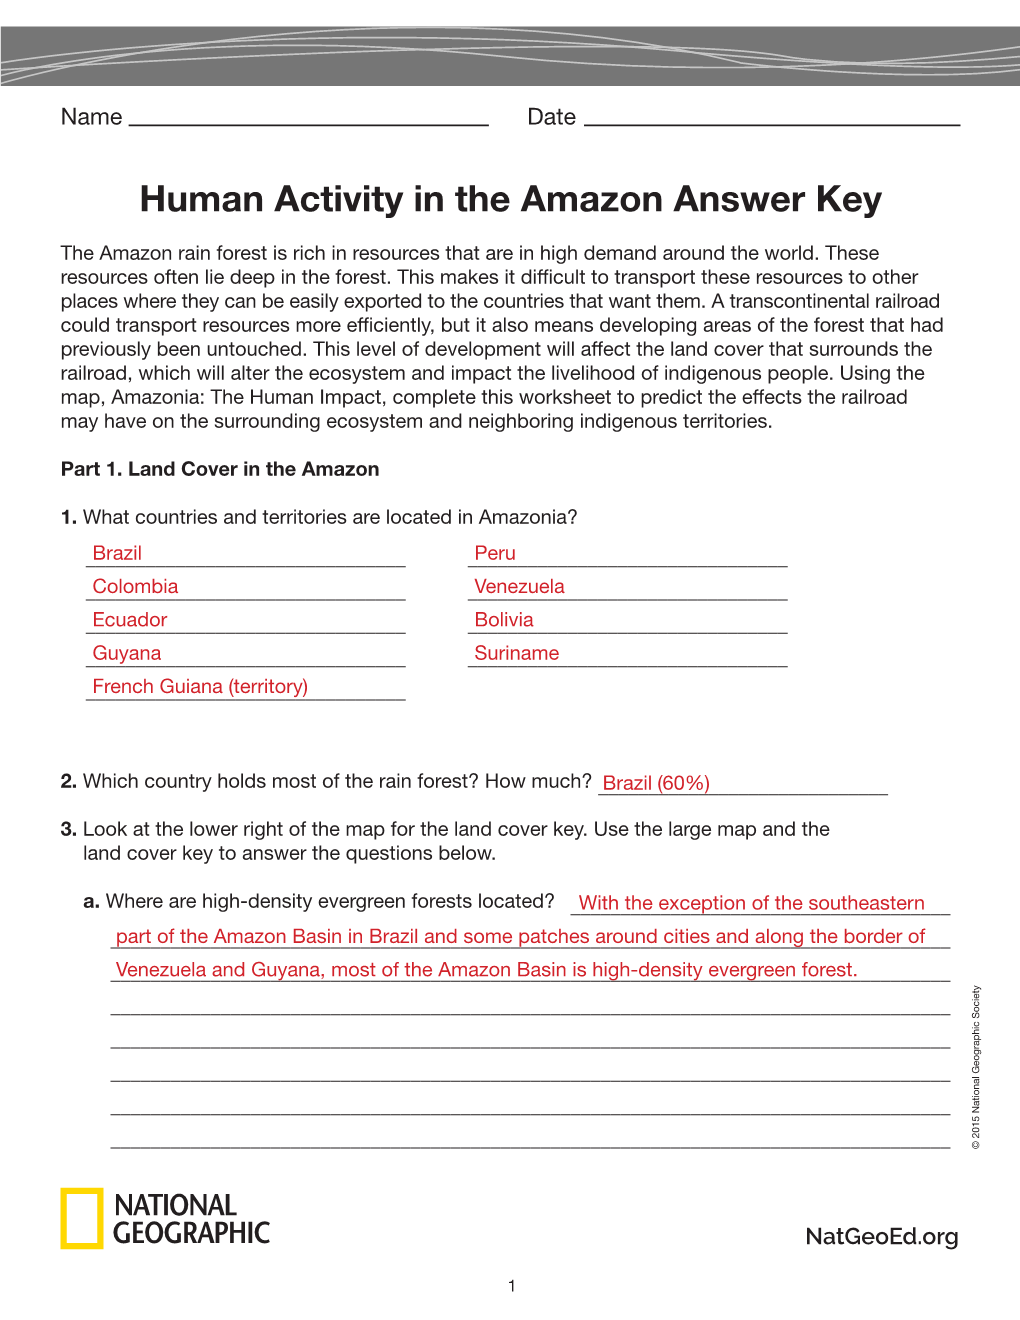 Human Activity in the Amazon Answer Key